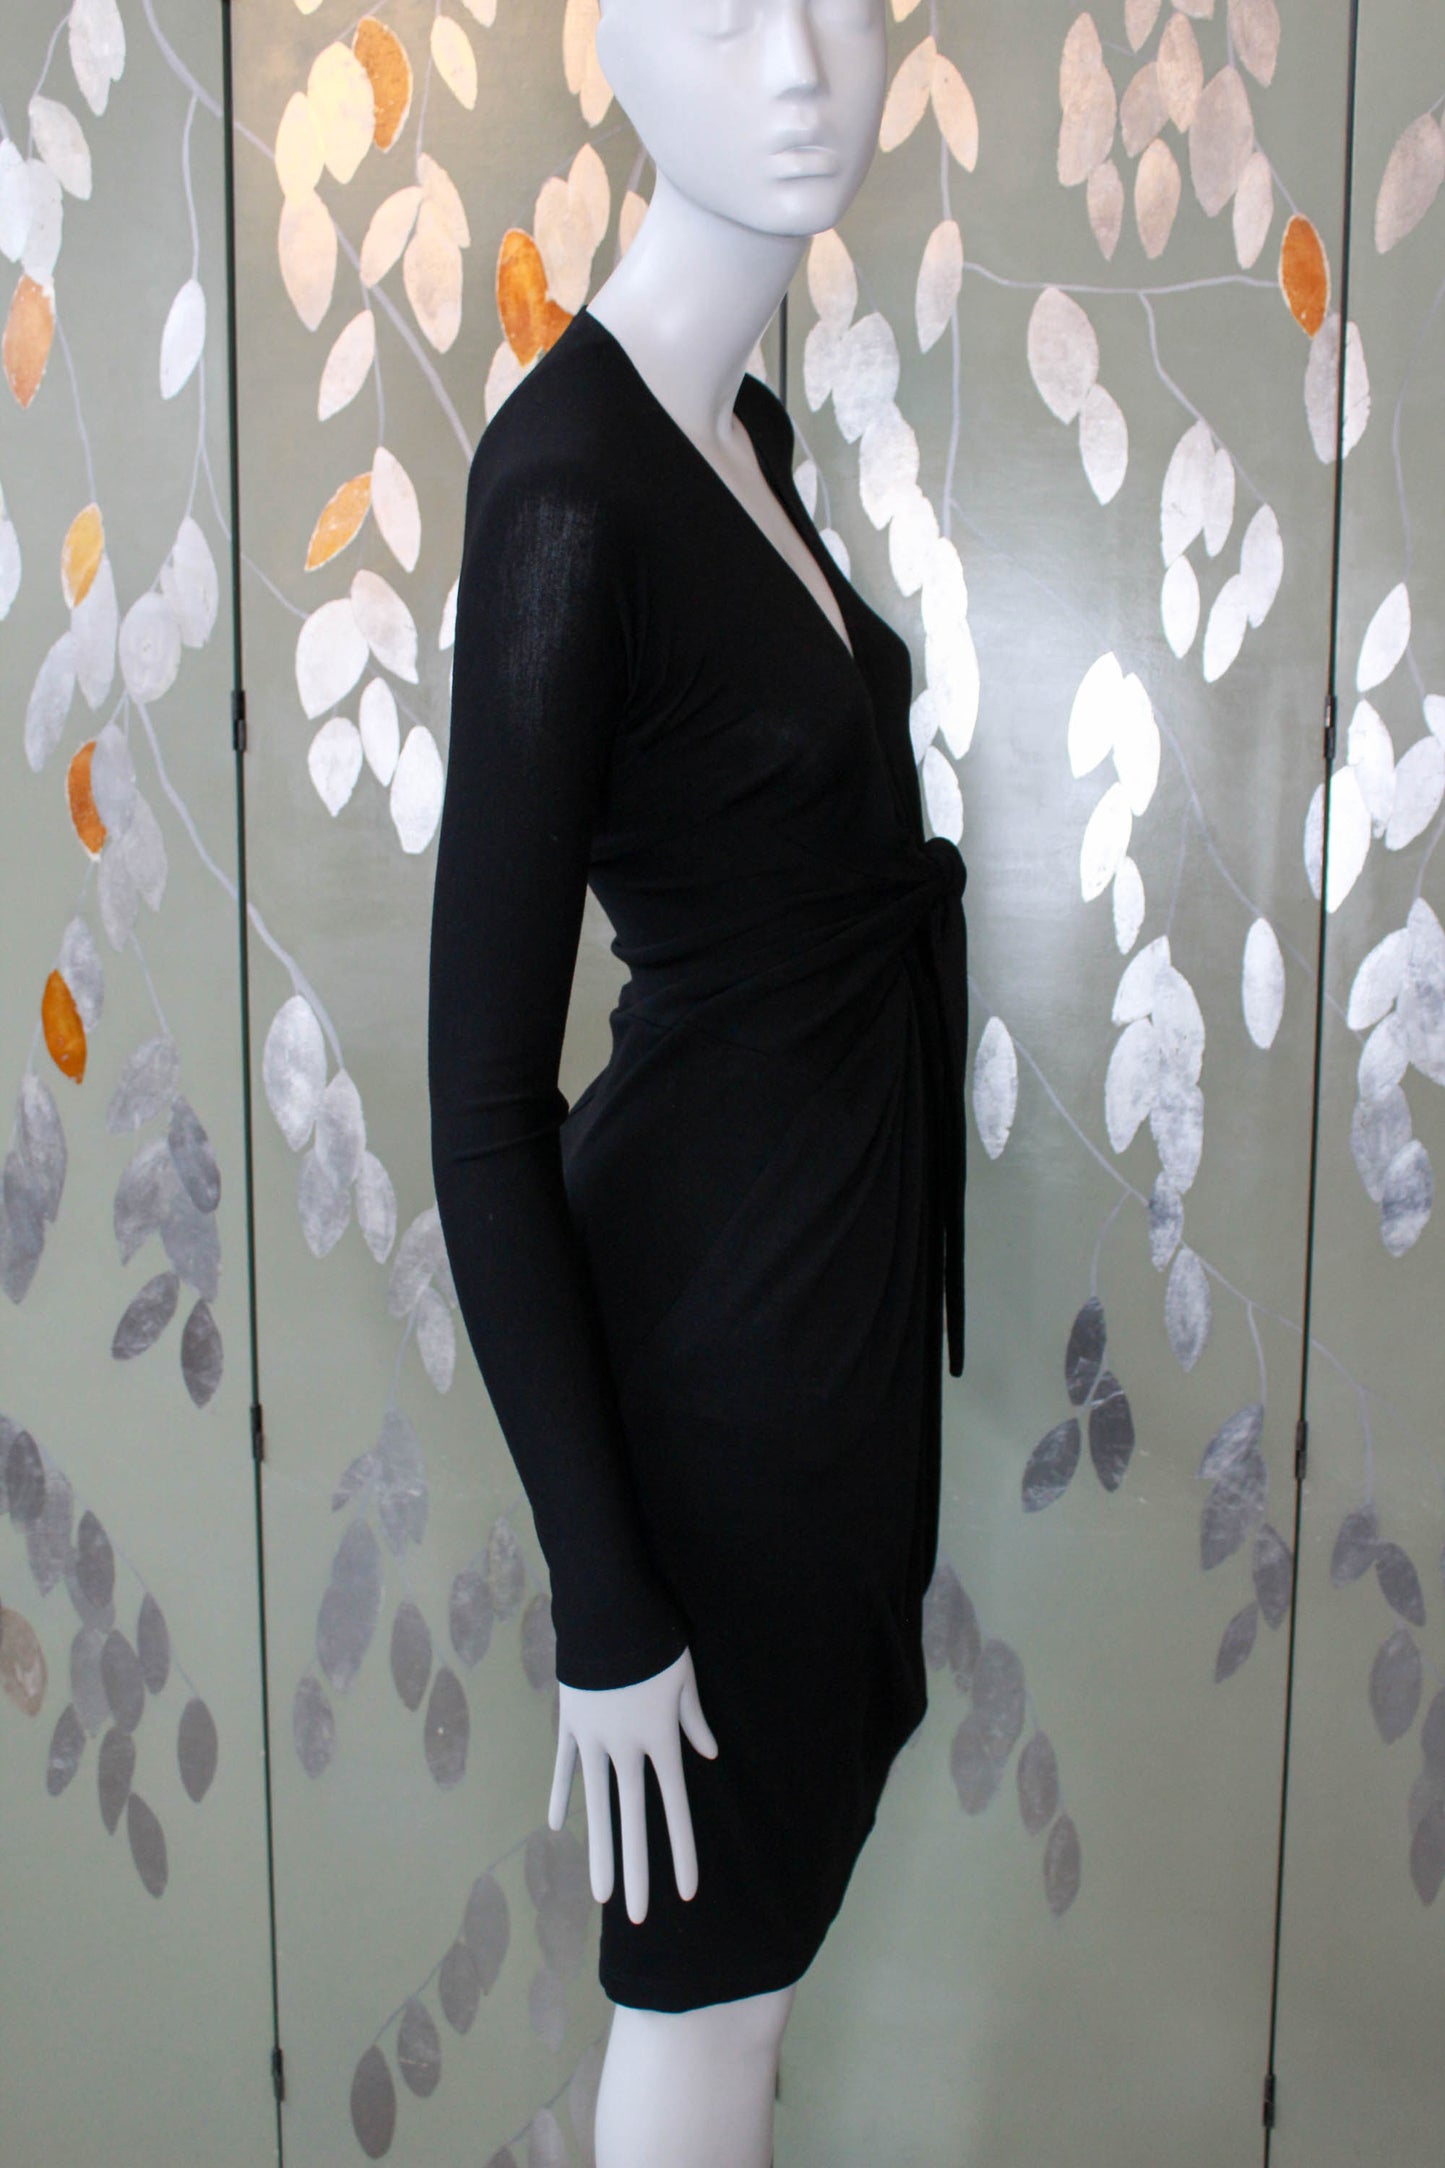 2000s DKNY donna karan new york black label wool blend jersey spandex dress with long sleeves, tie at centre front waist, deep v neck, holiday new years eve party dress